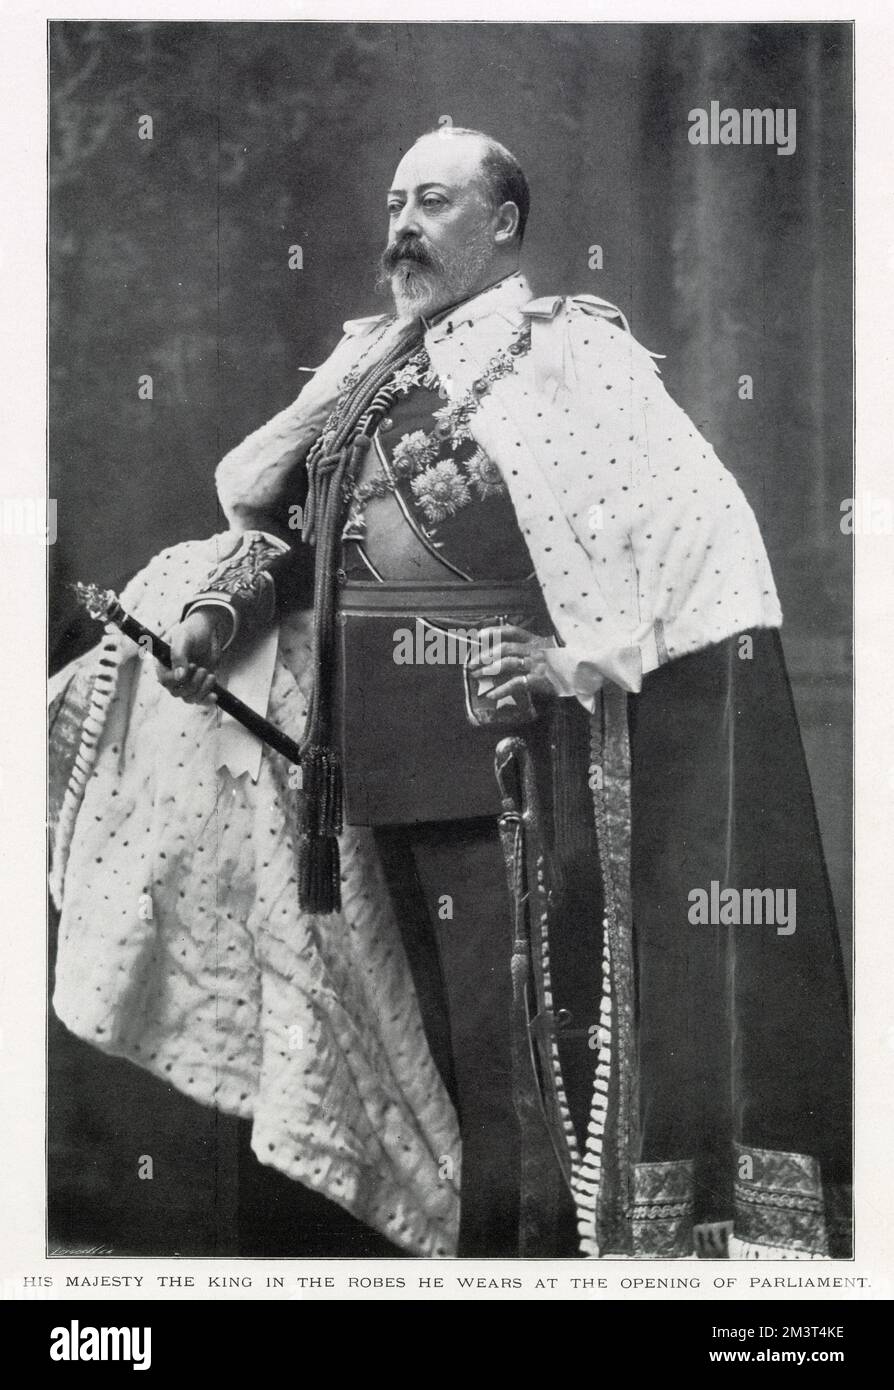 King Edward VII (1841 - 1910), wearing the robes for the opening of Parliament. Stock Photo